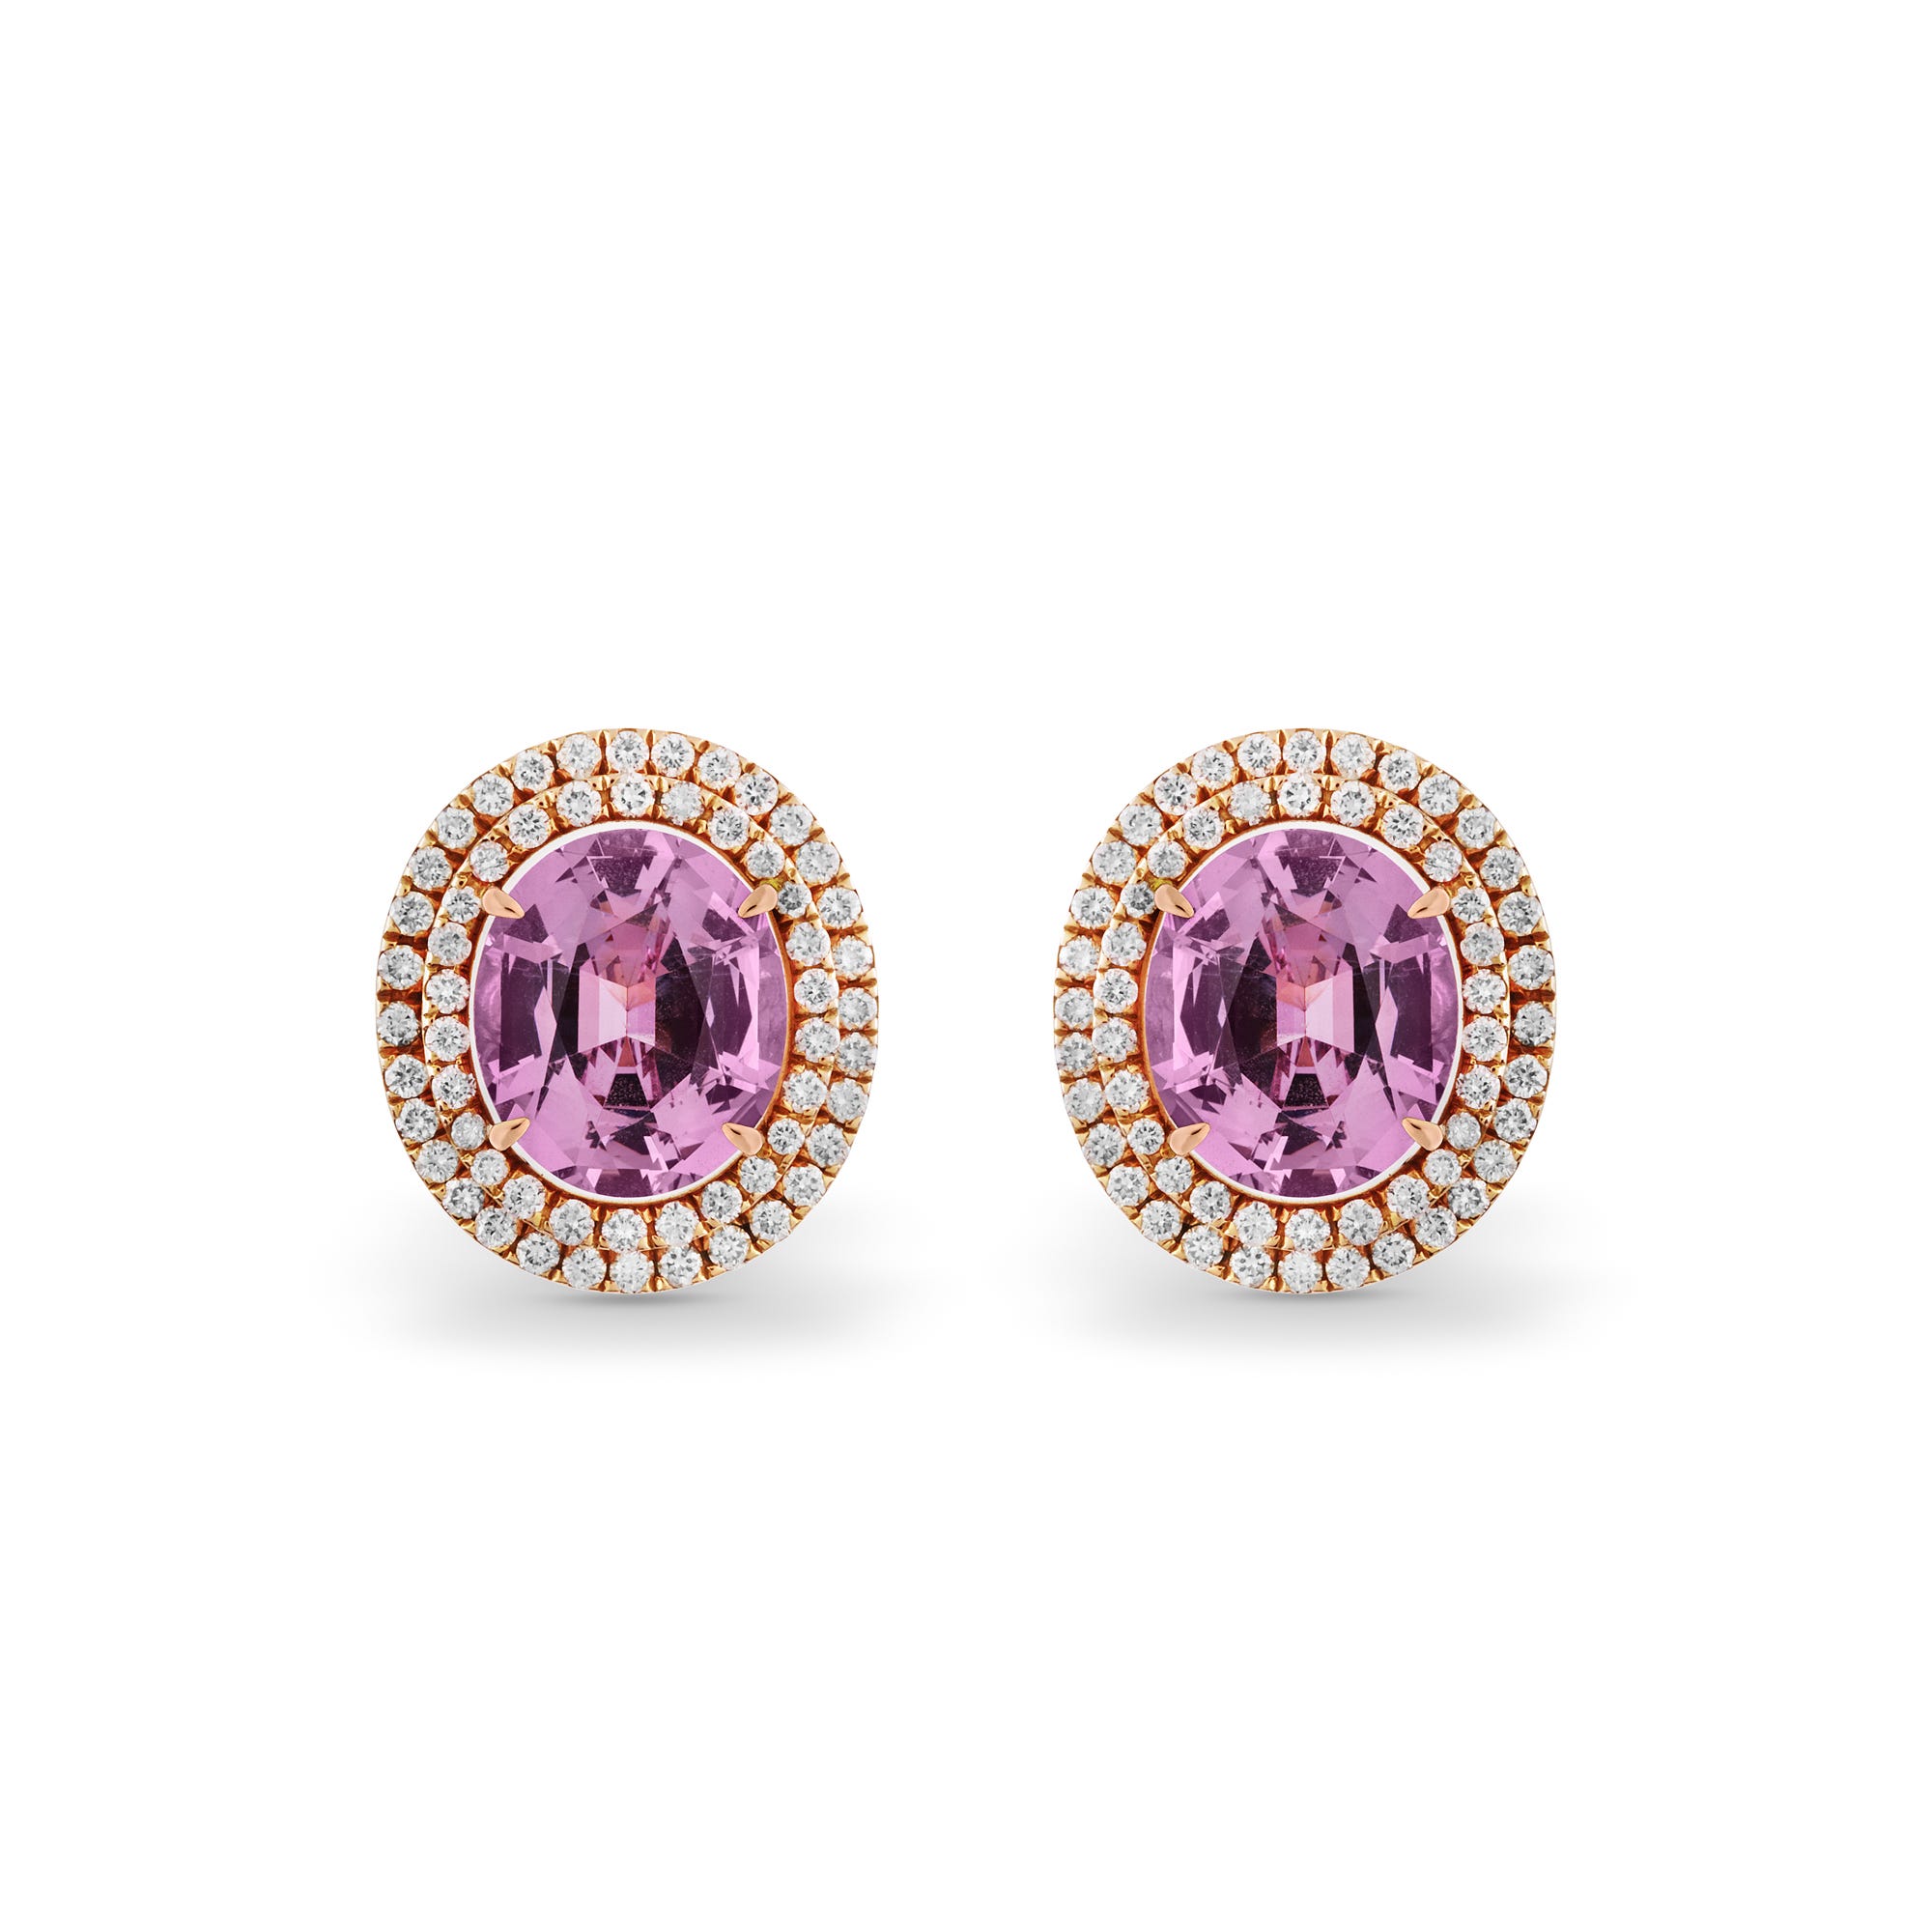 Oval Pastel Pink Spinel and Diamond Earrings, Rose Gold